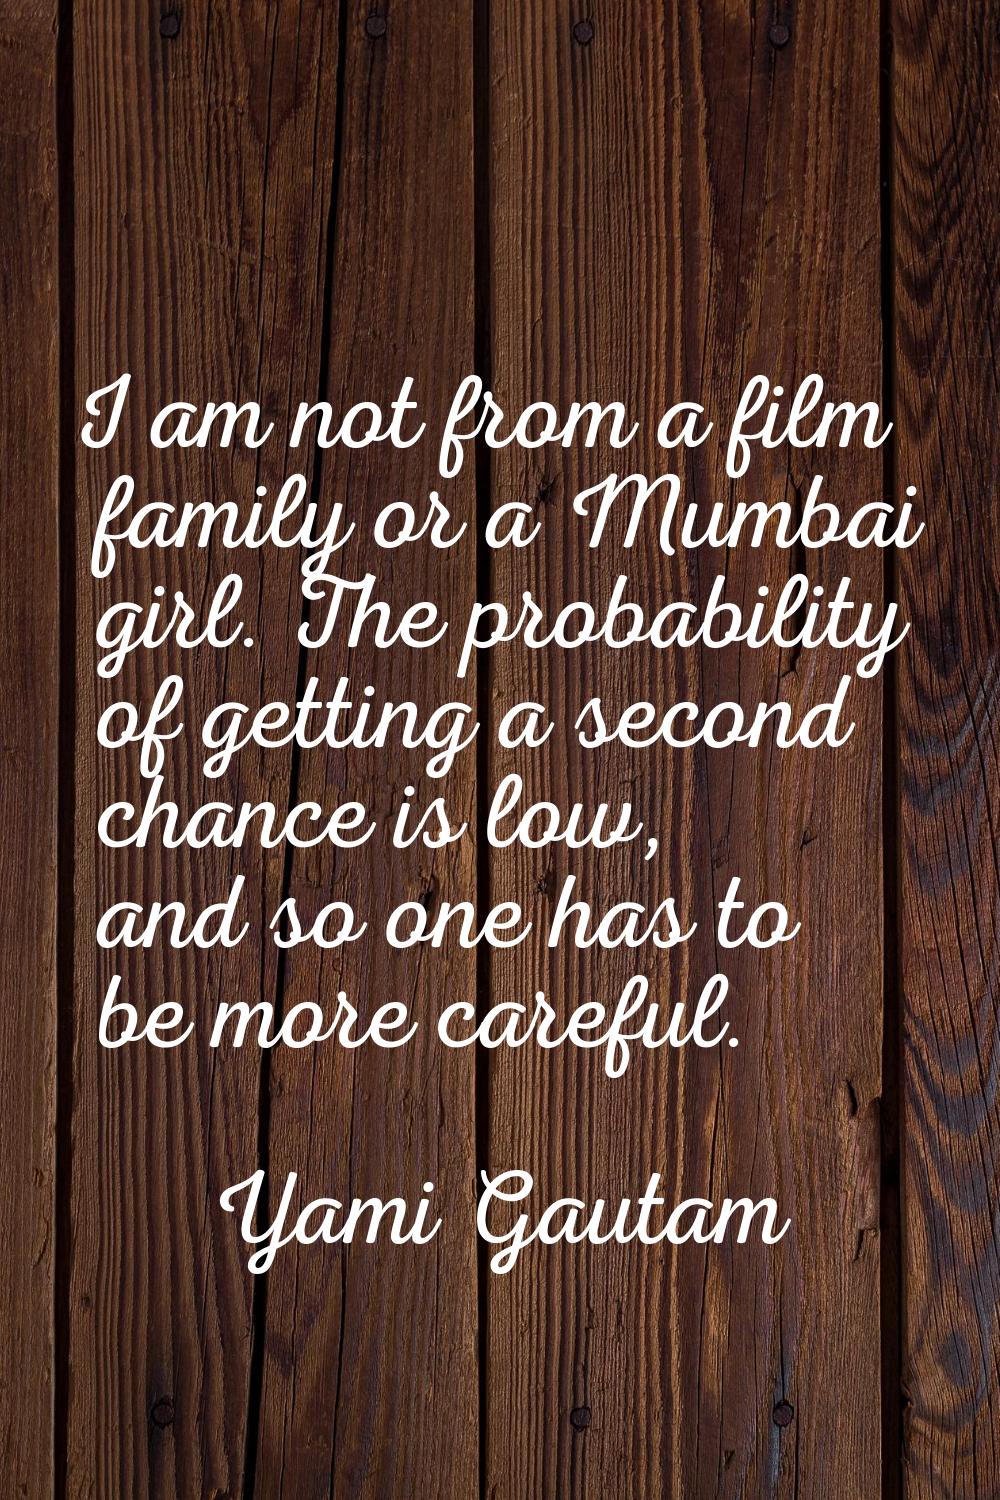 I am not from a film family or a Mumbai girl. The probability of getting a second chance is low, an